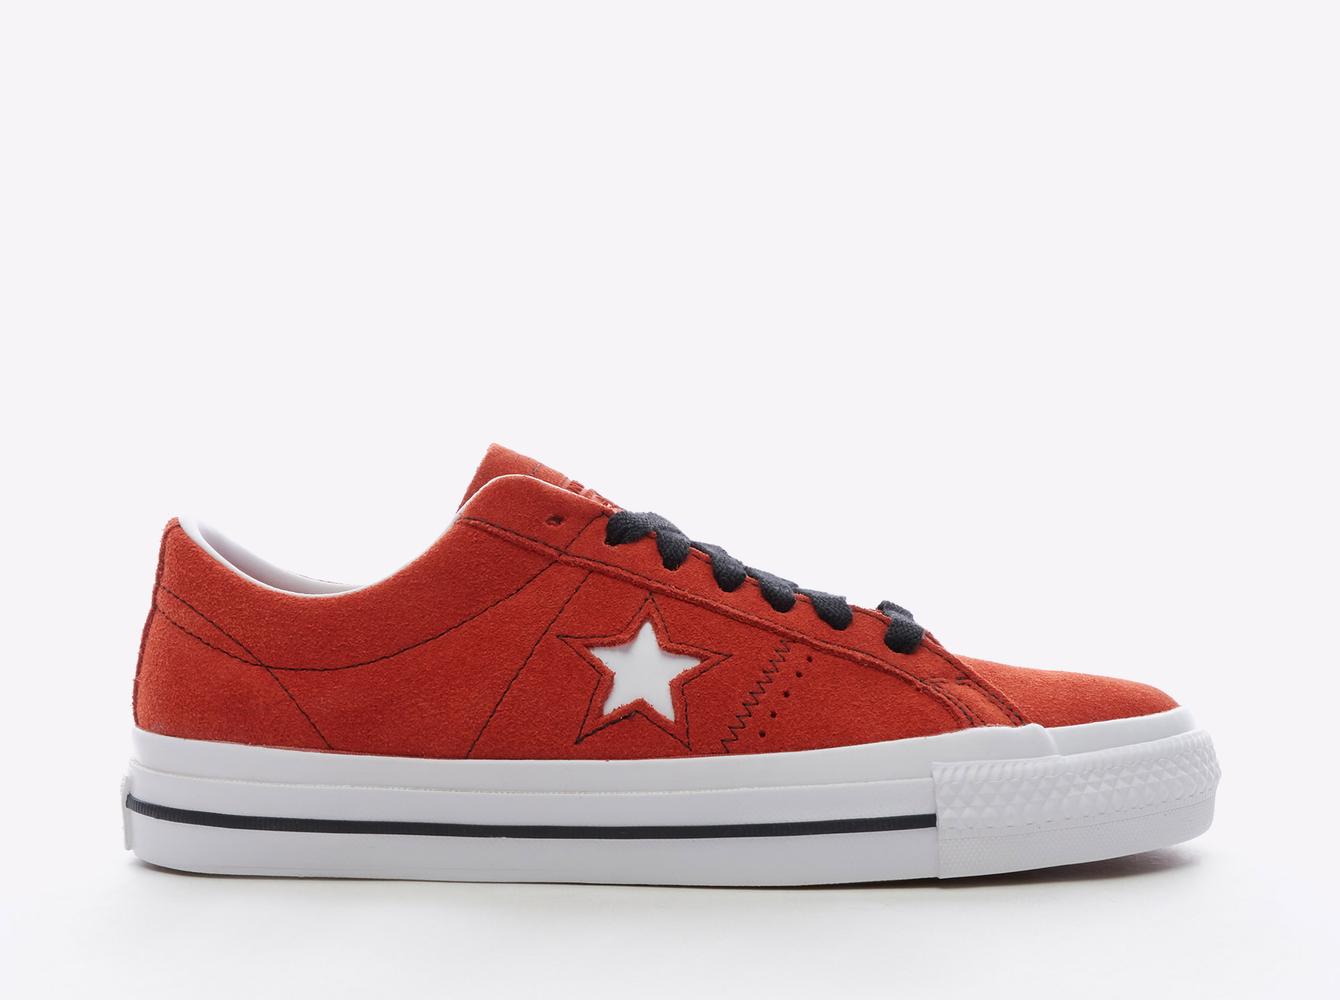 Cons One Star Pro Suede